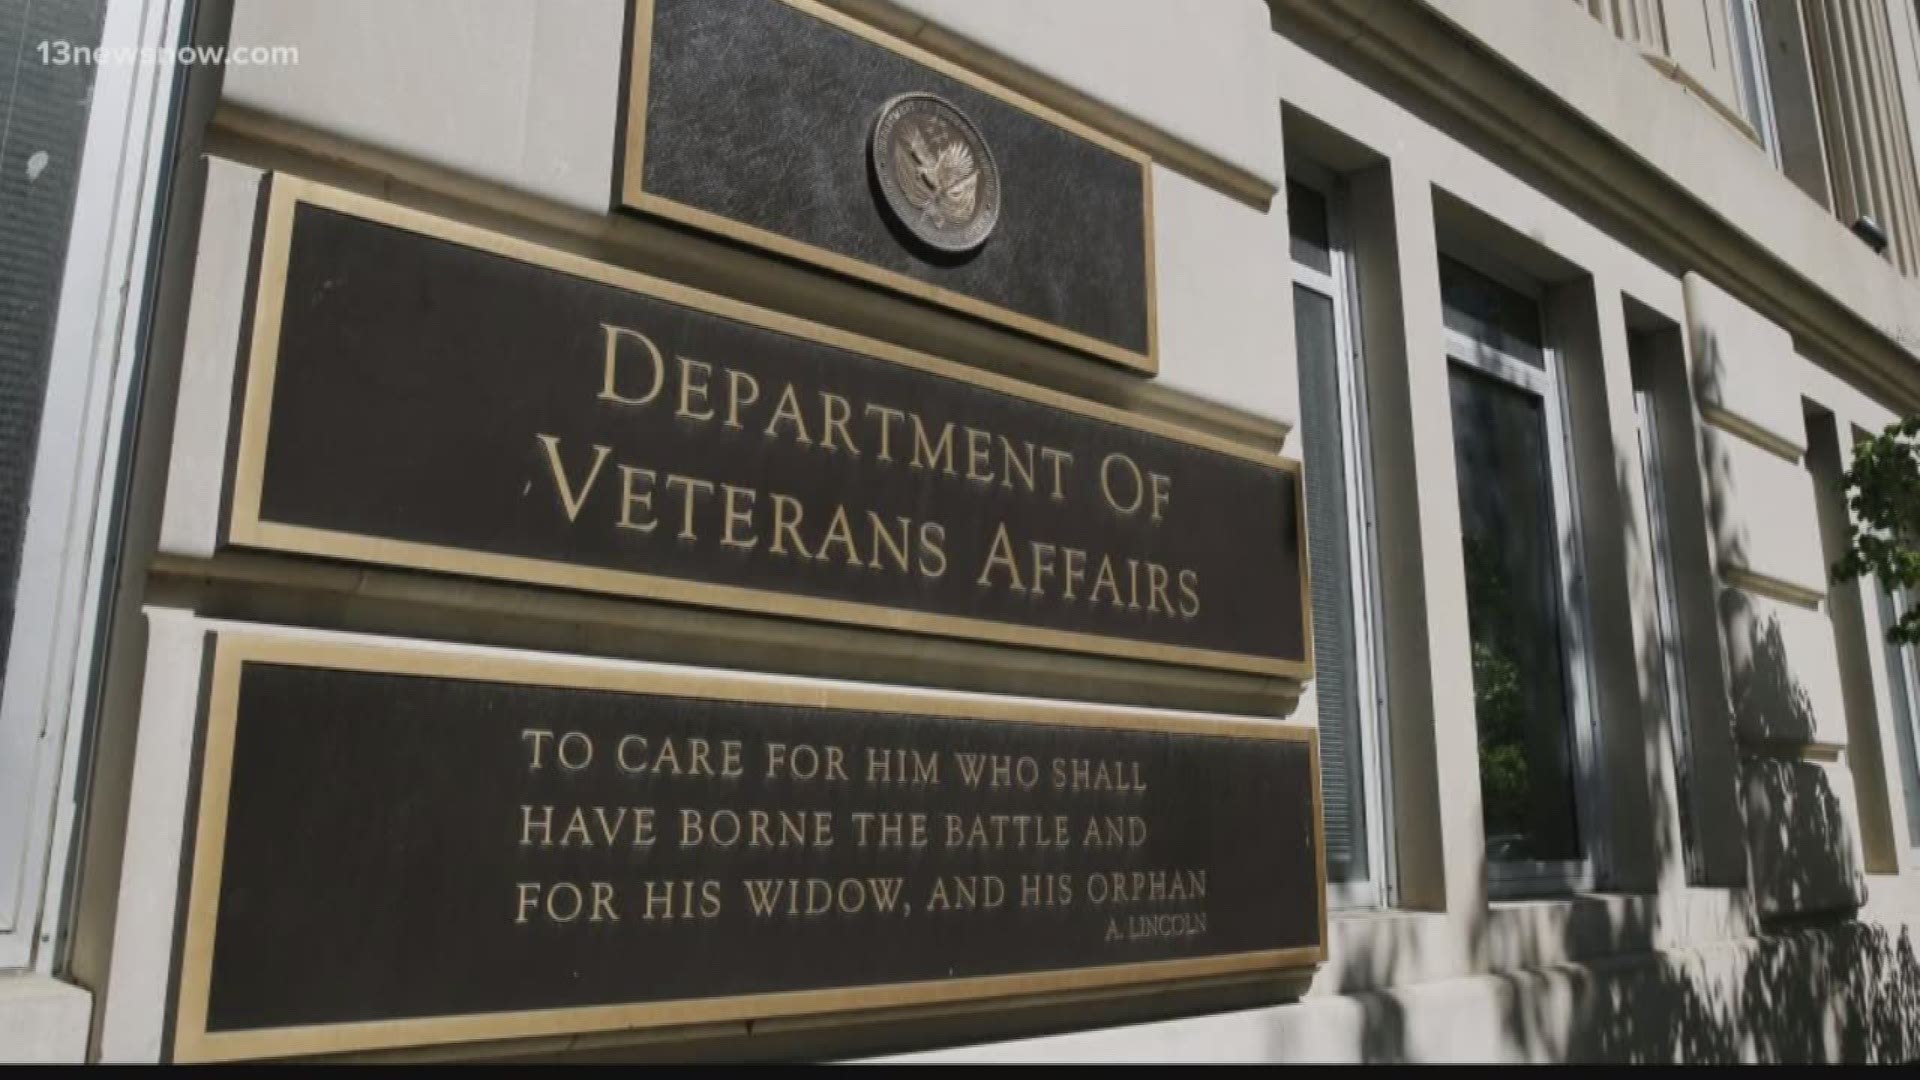 Some new rules could make it harder for the nation's 20 million military veterans to get the benefits they earned.